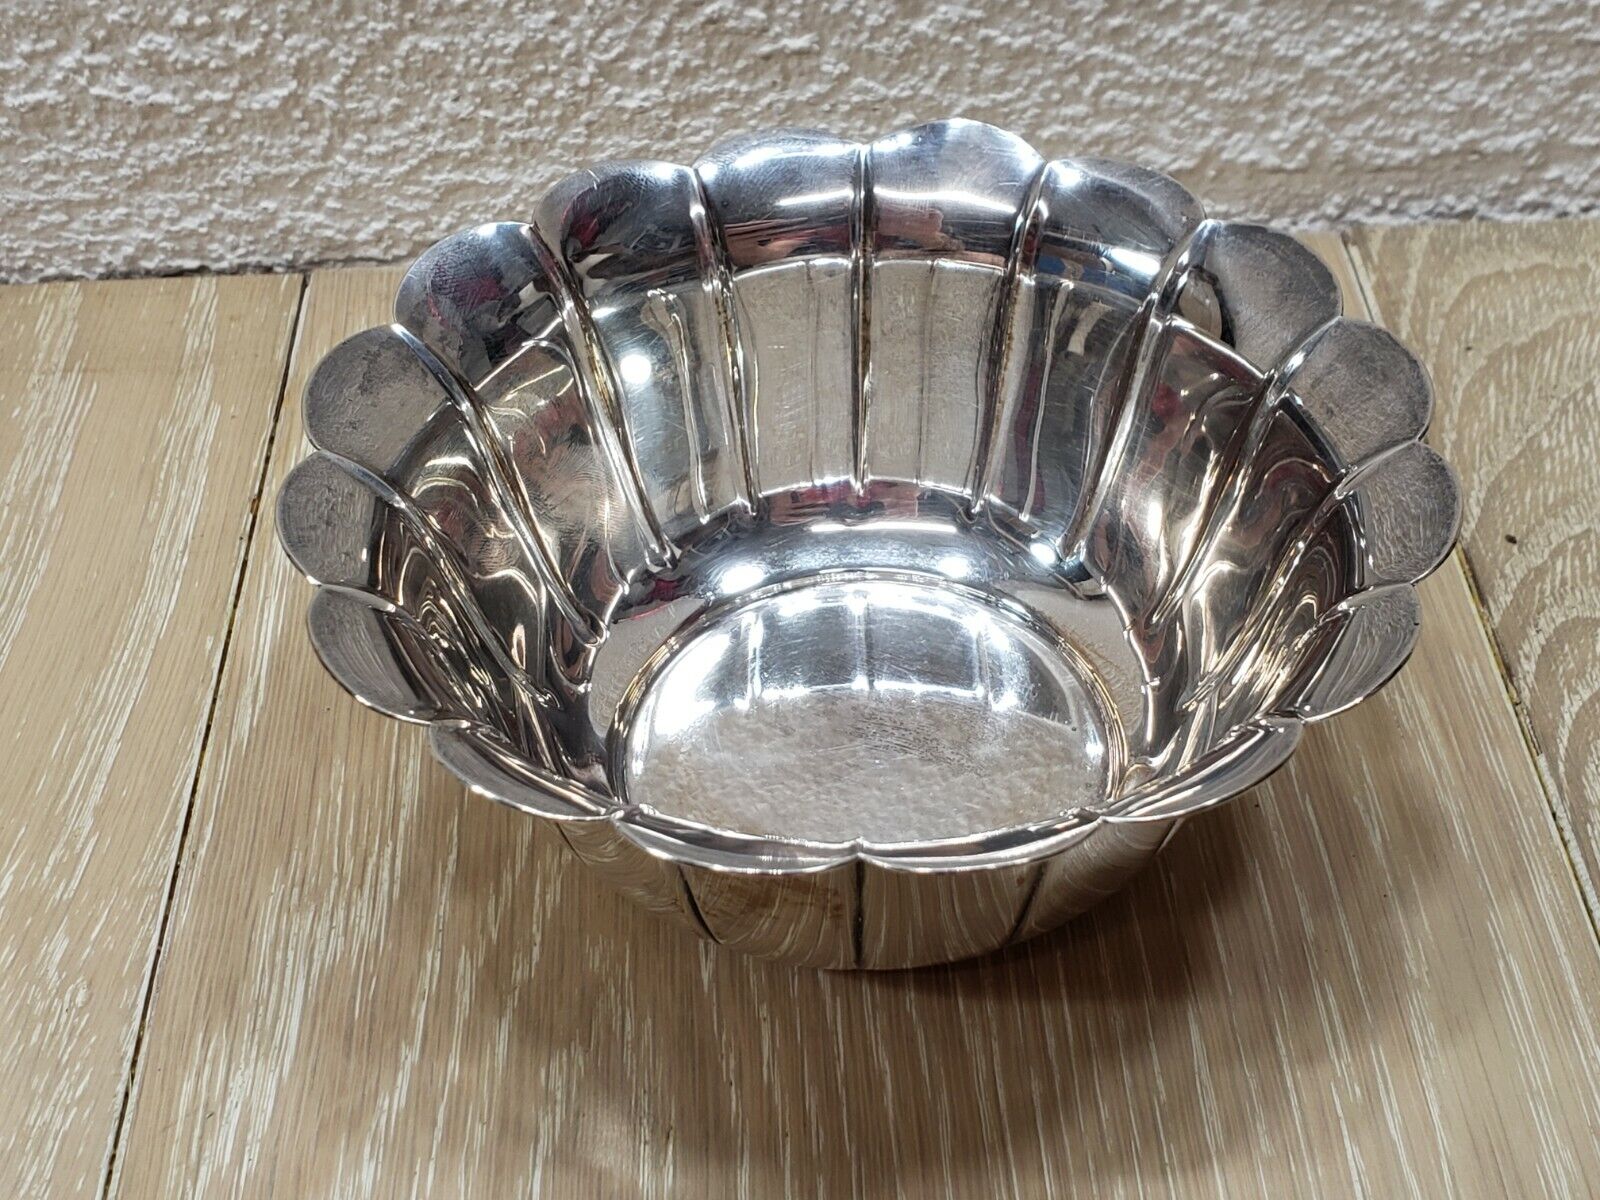 Tiffany & Co. Makers Sterling Silver Fluted Nut Candy Bowl #23991 - 186 Grams Tw